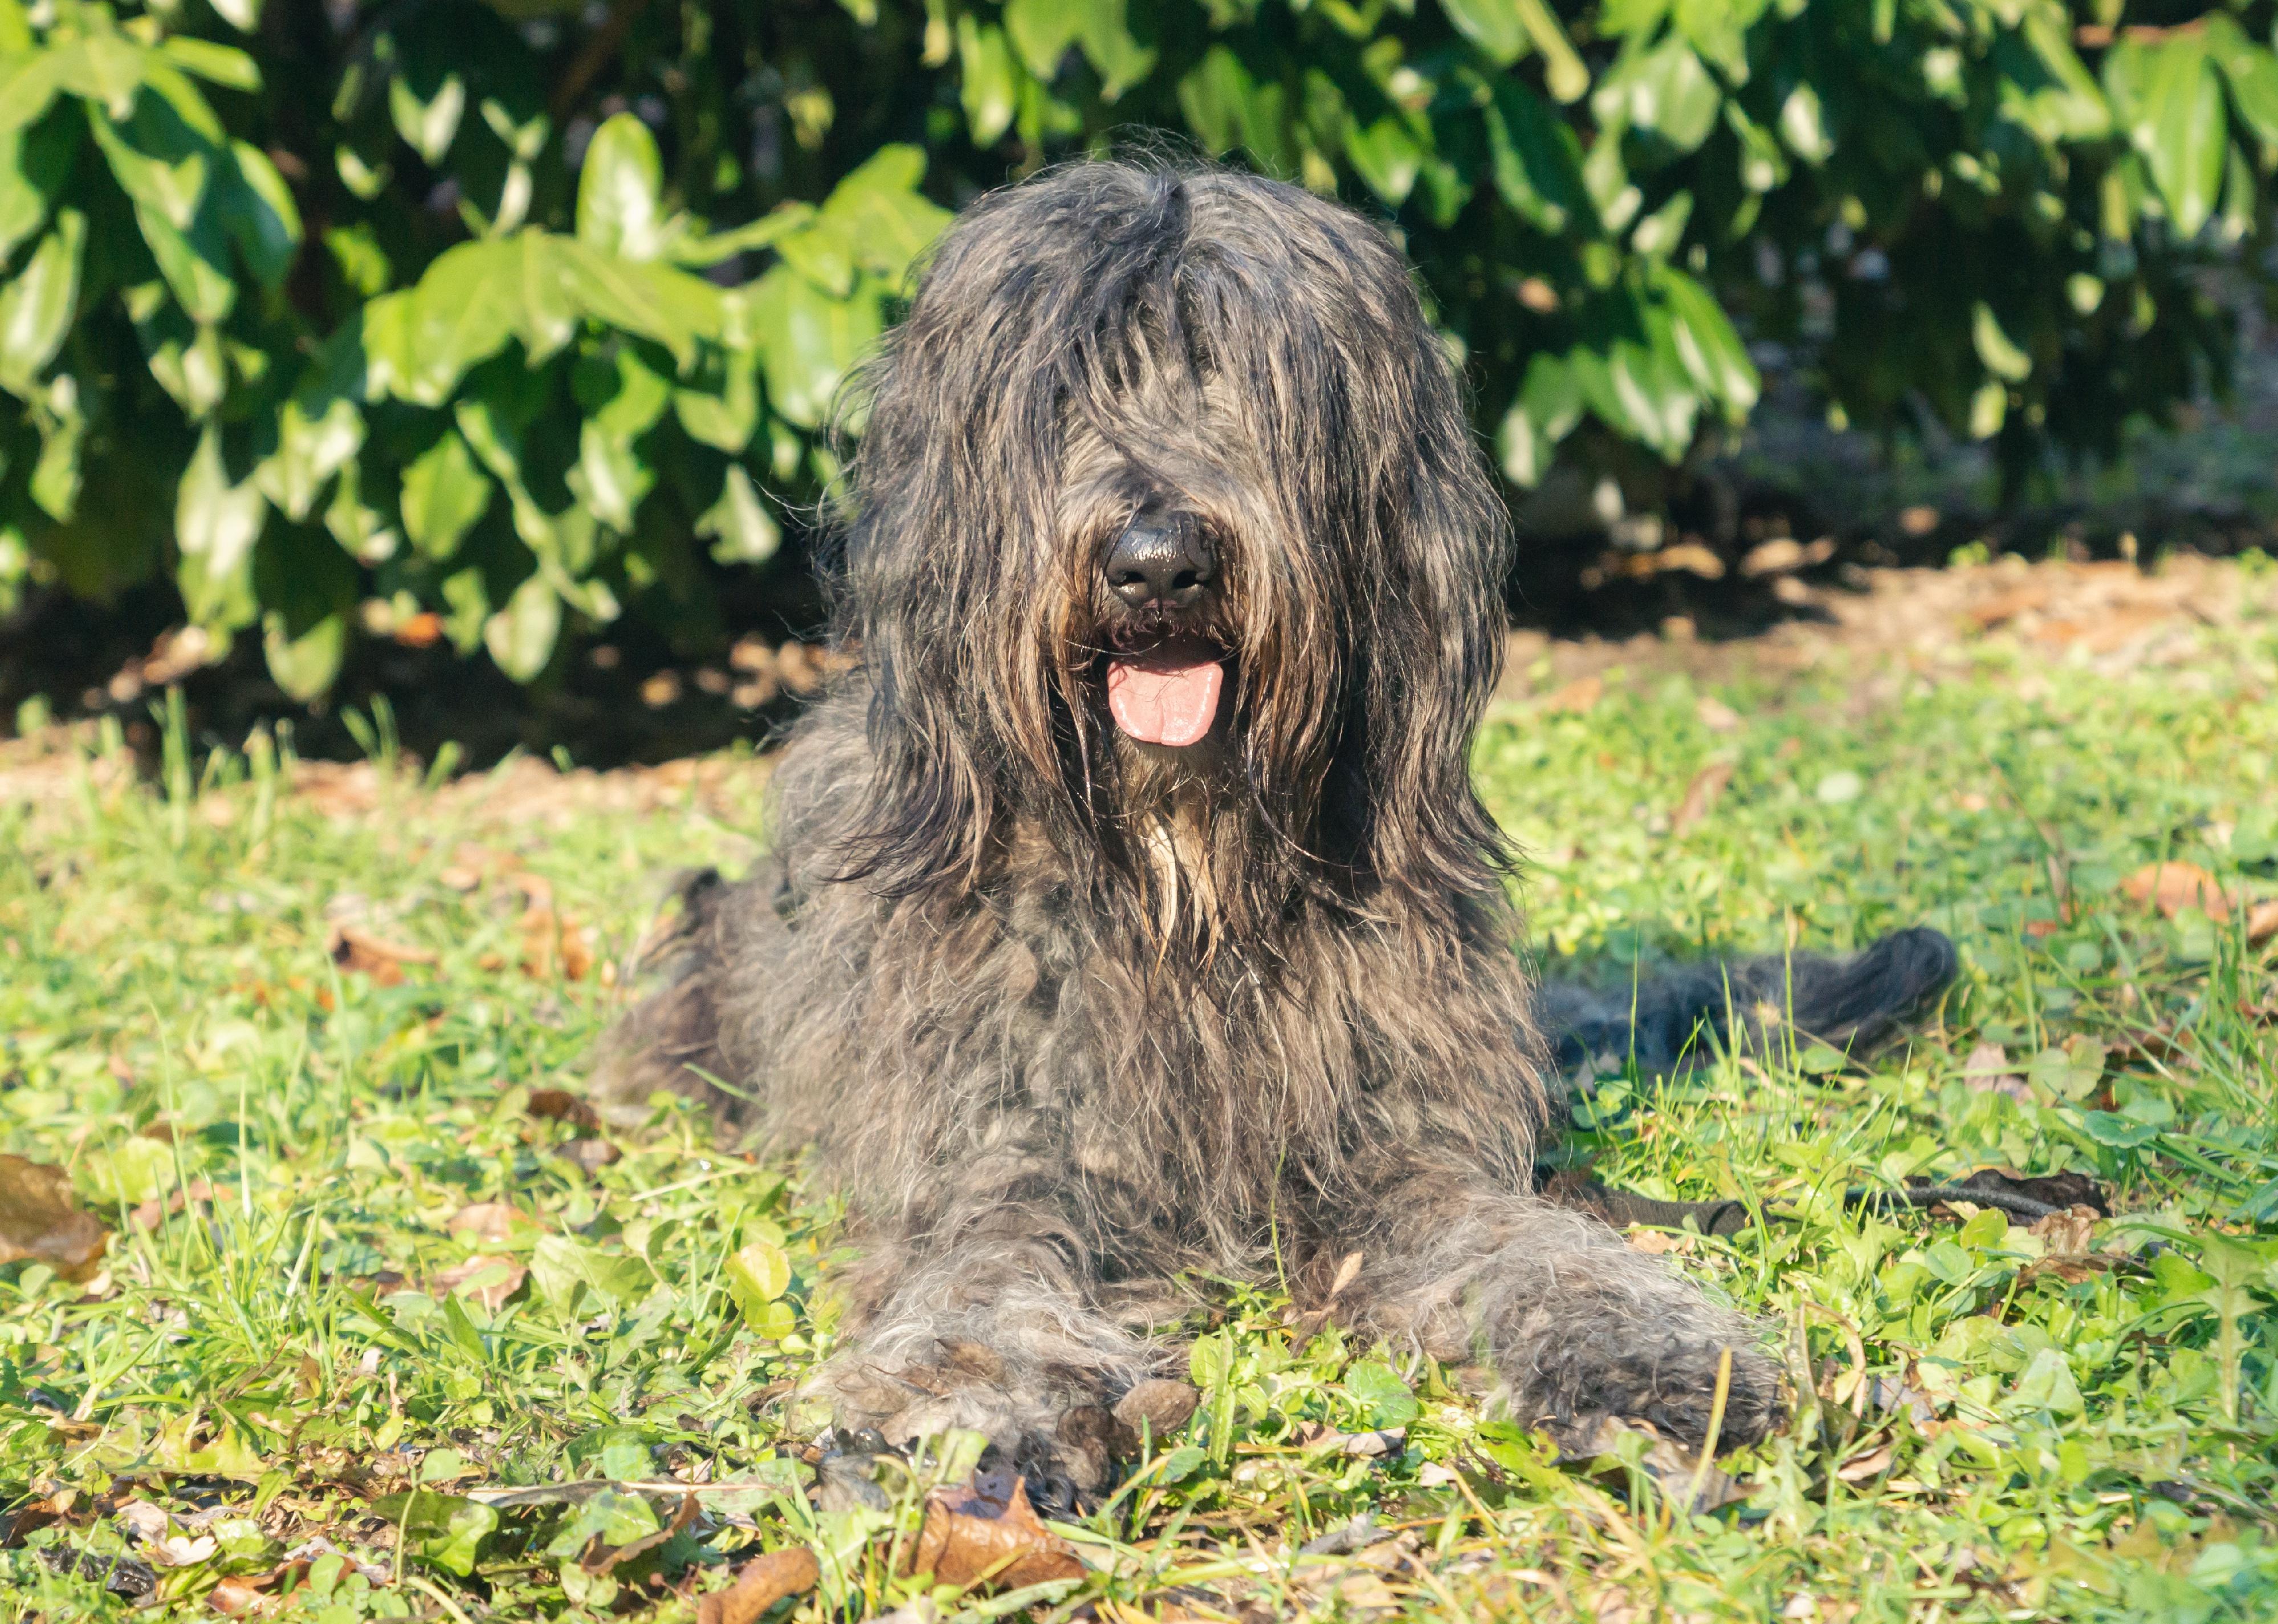 Bergamasco Shepherd dog with black coat is seen on an autumn day outside in a park.